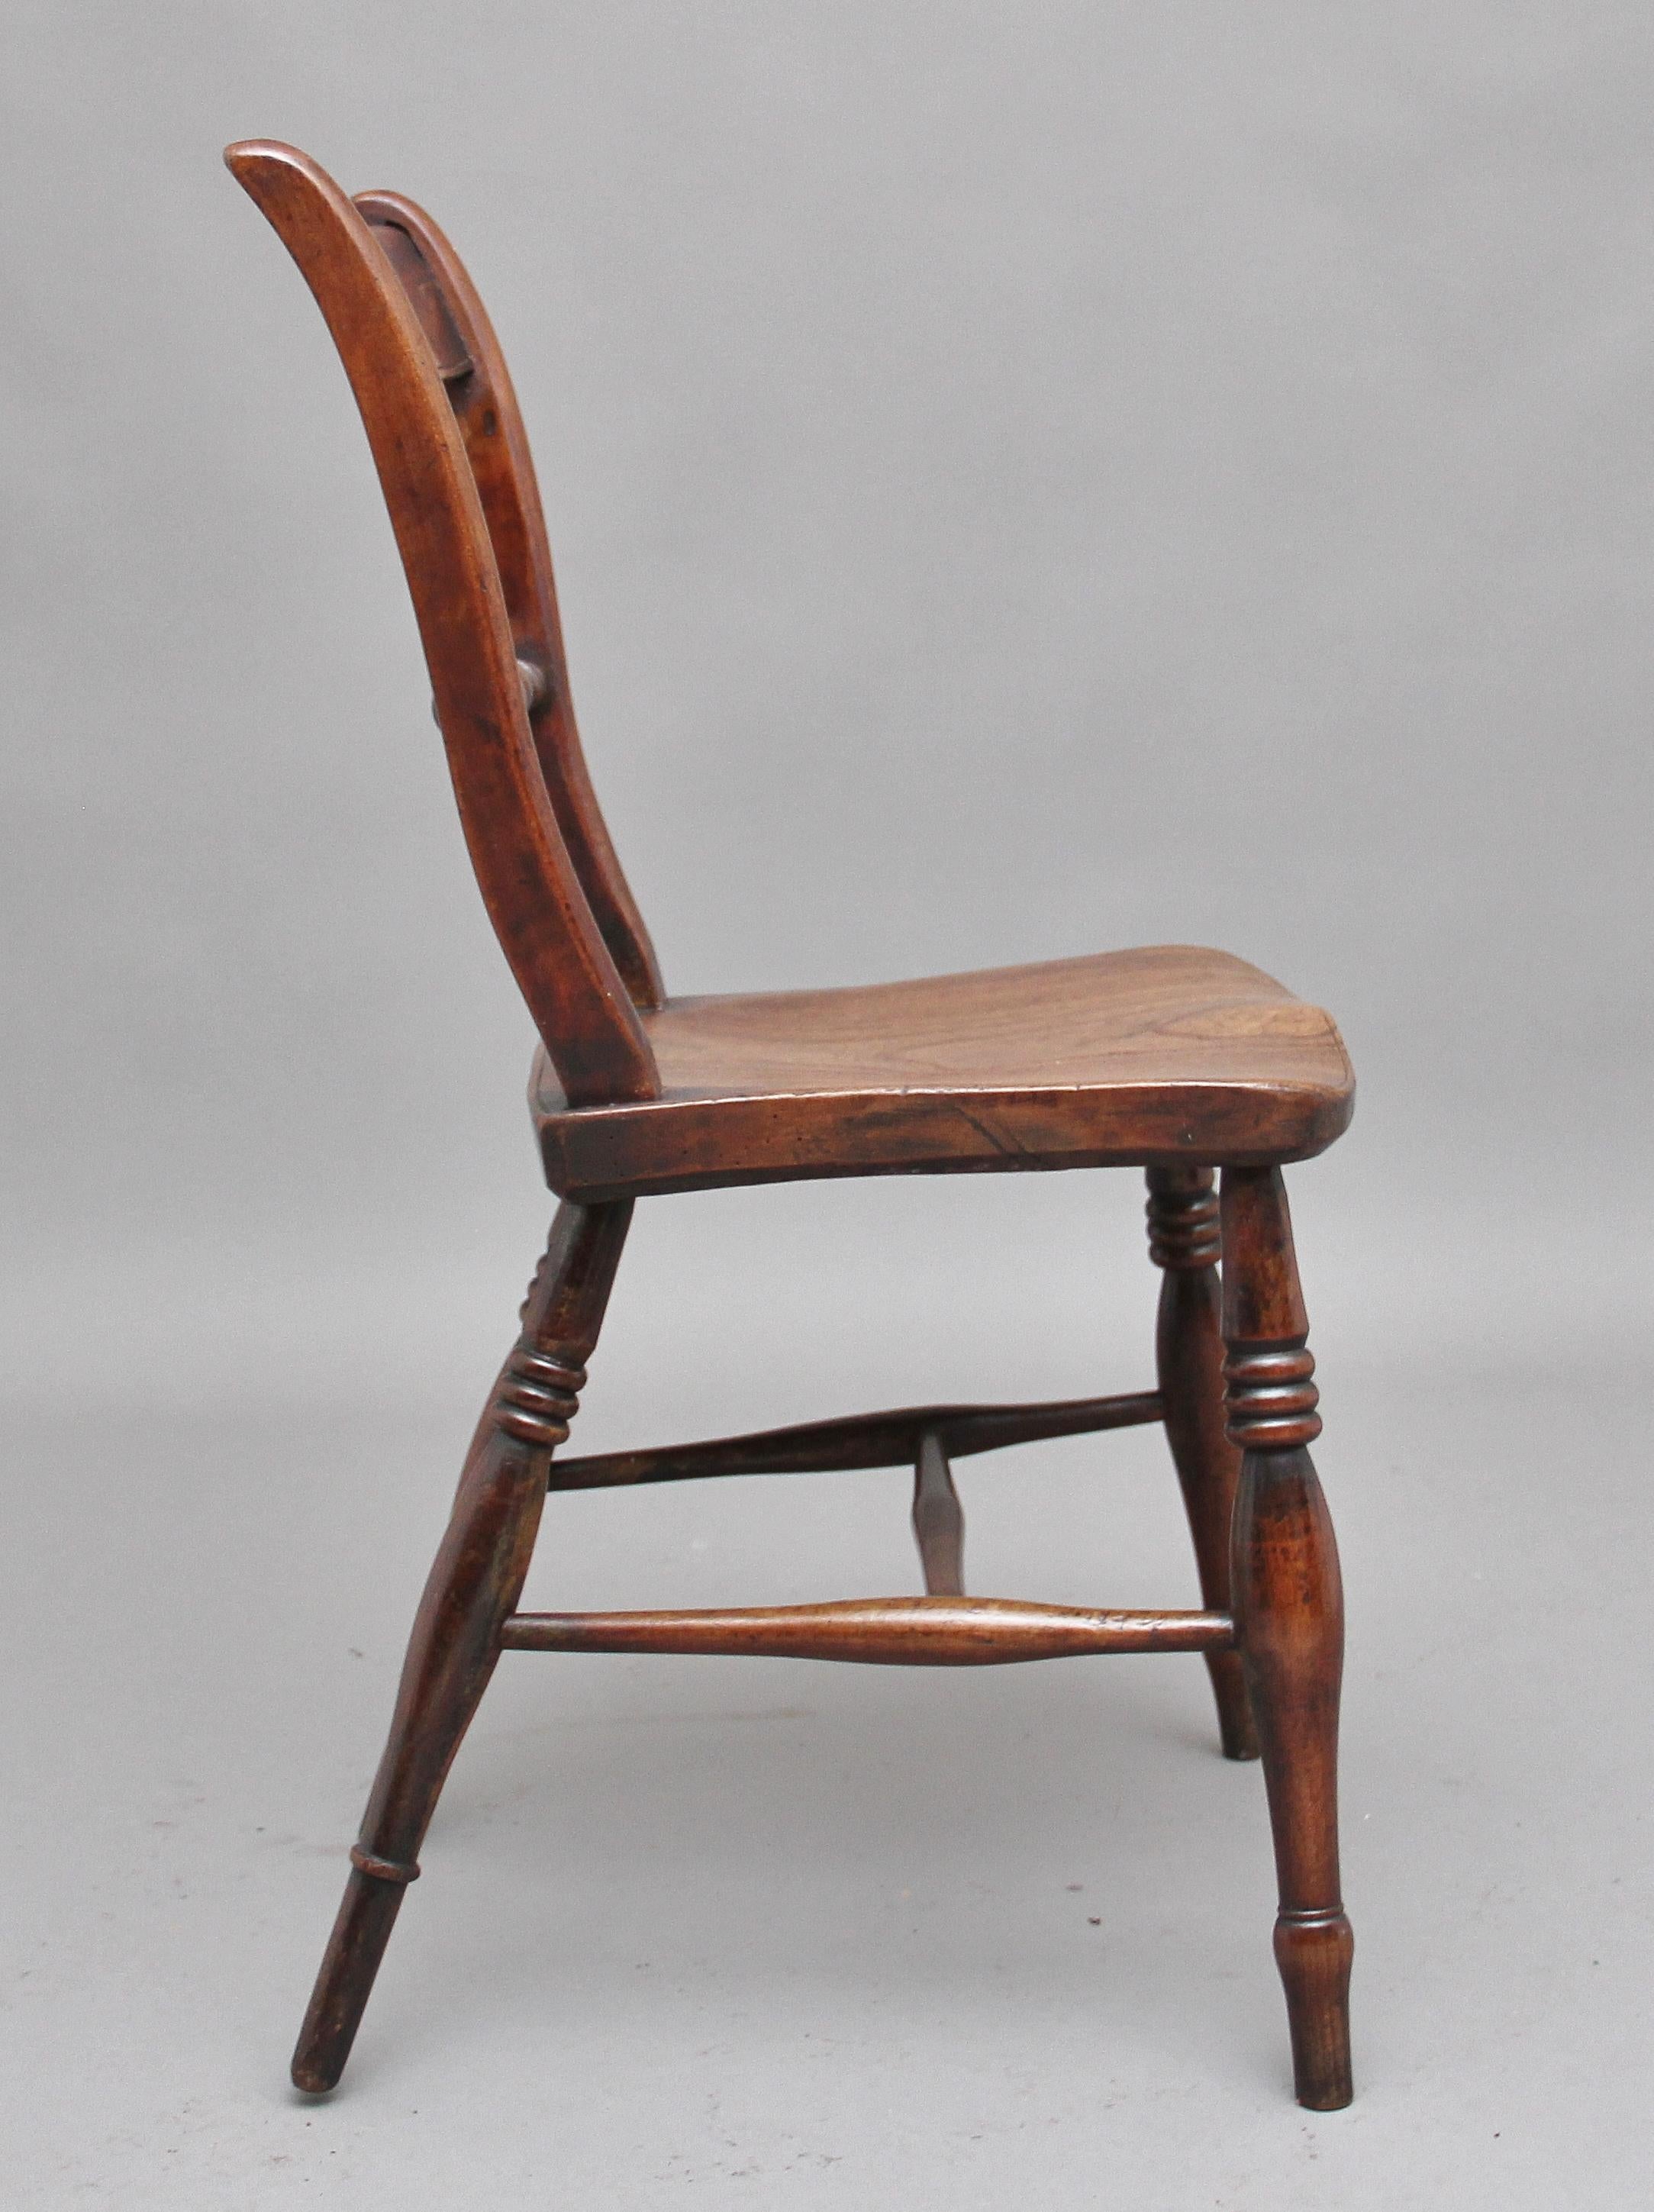 Early 19th century elm and ash side chair, the bar back supported by a turned spindle, a nice figured saddle seat, standing on turned legs united by an H stretcher, circa 1840.
  